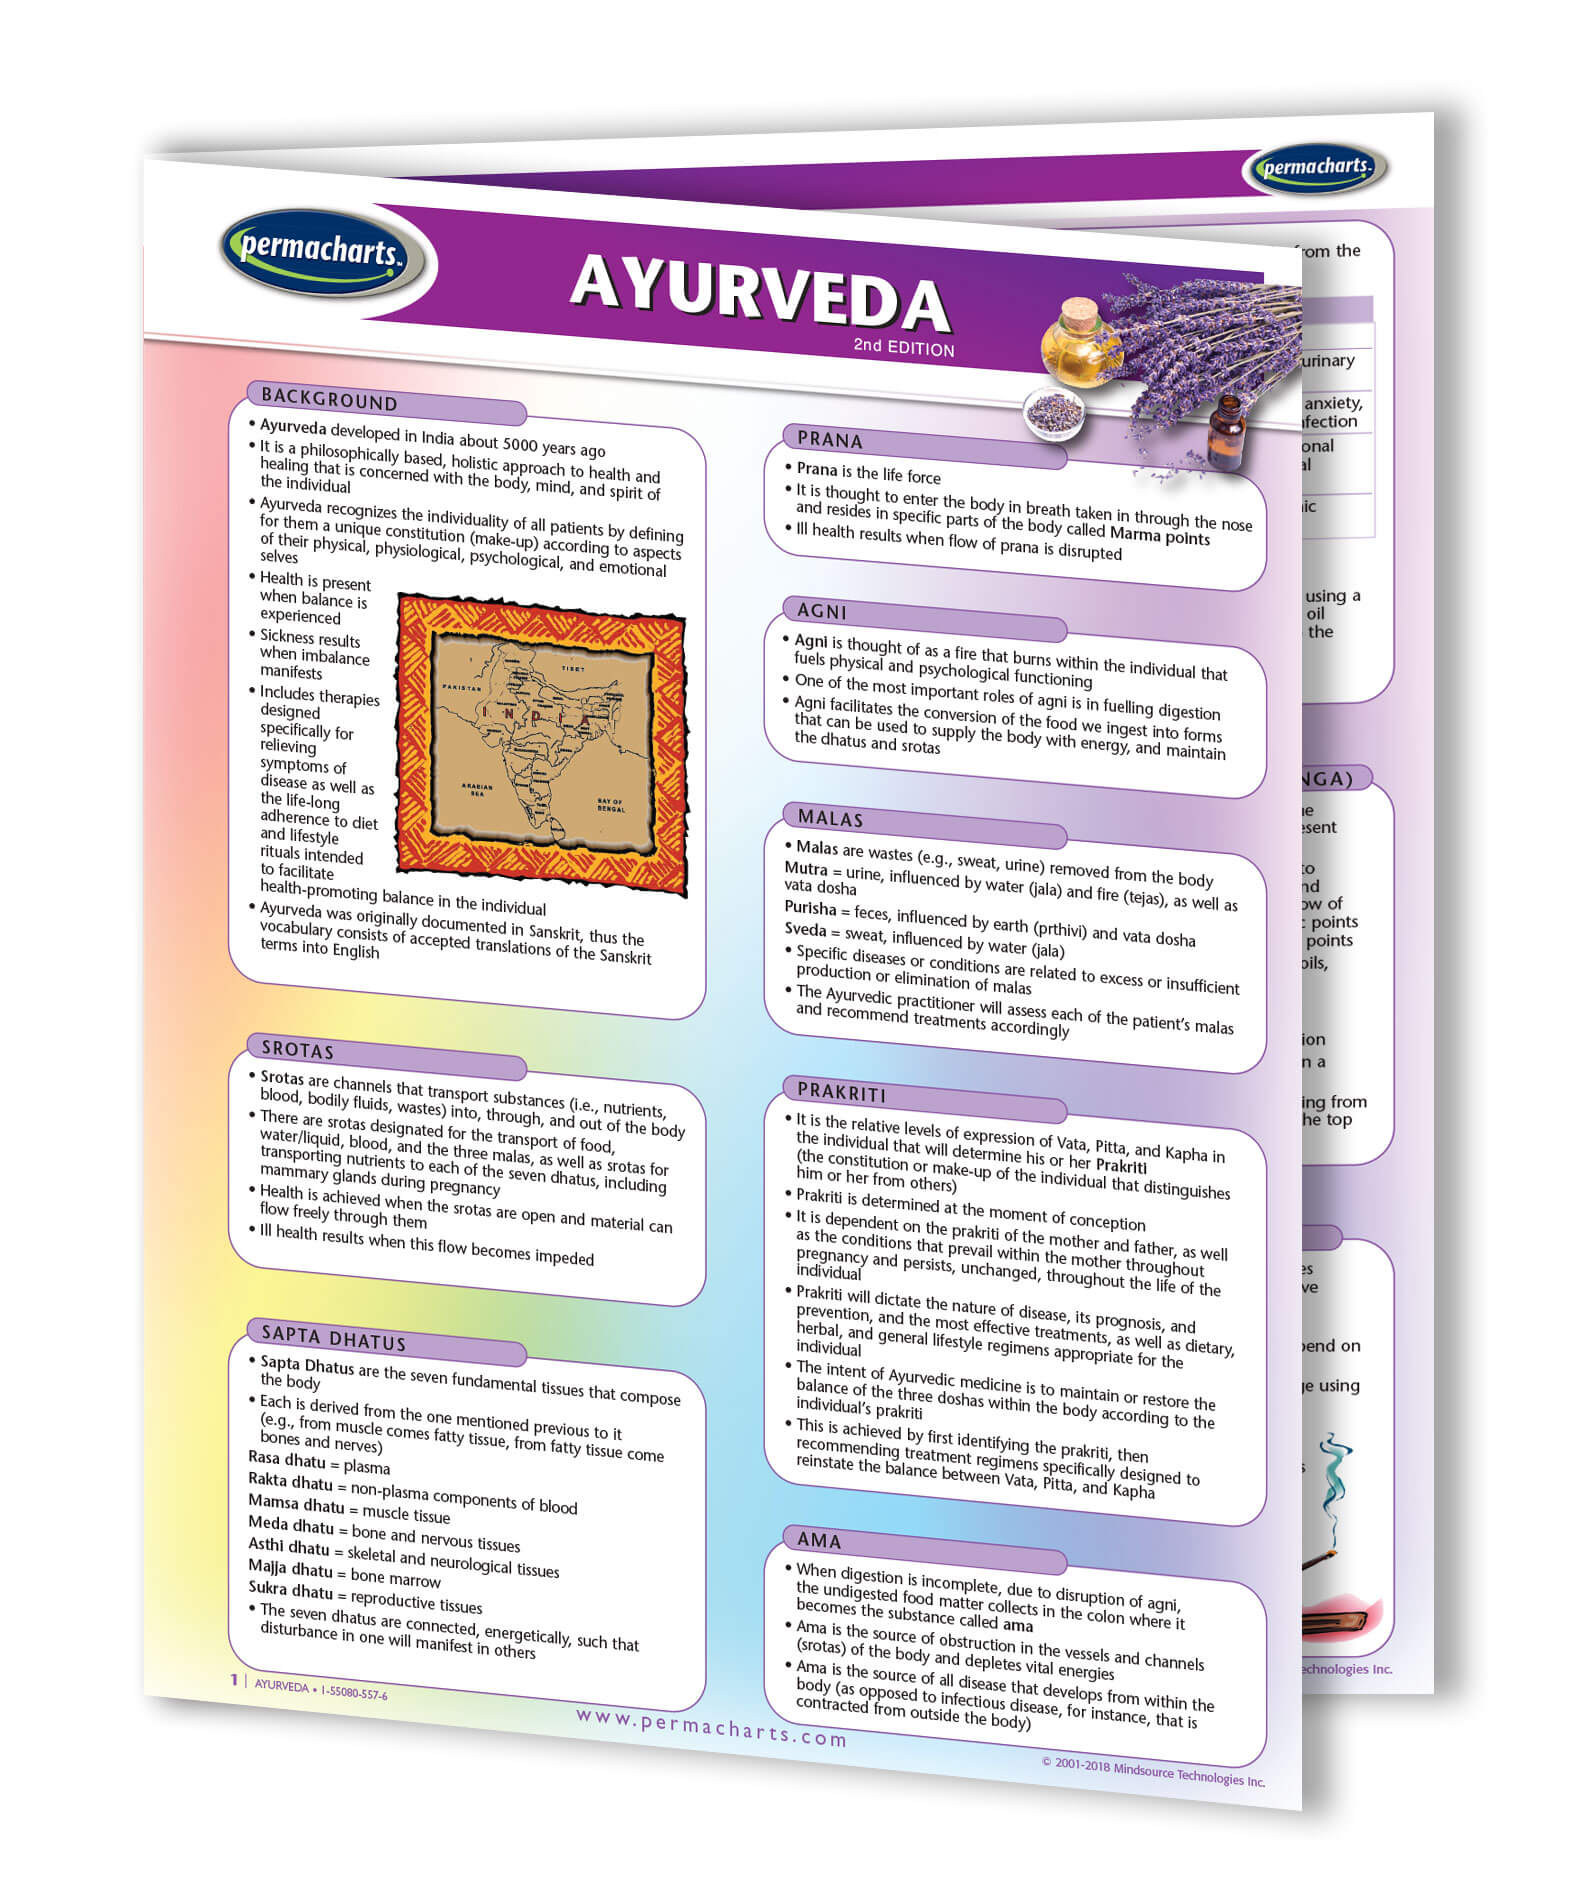 the complete illustrated guide to ayurveda pdf download